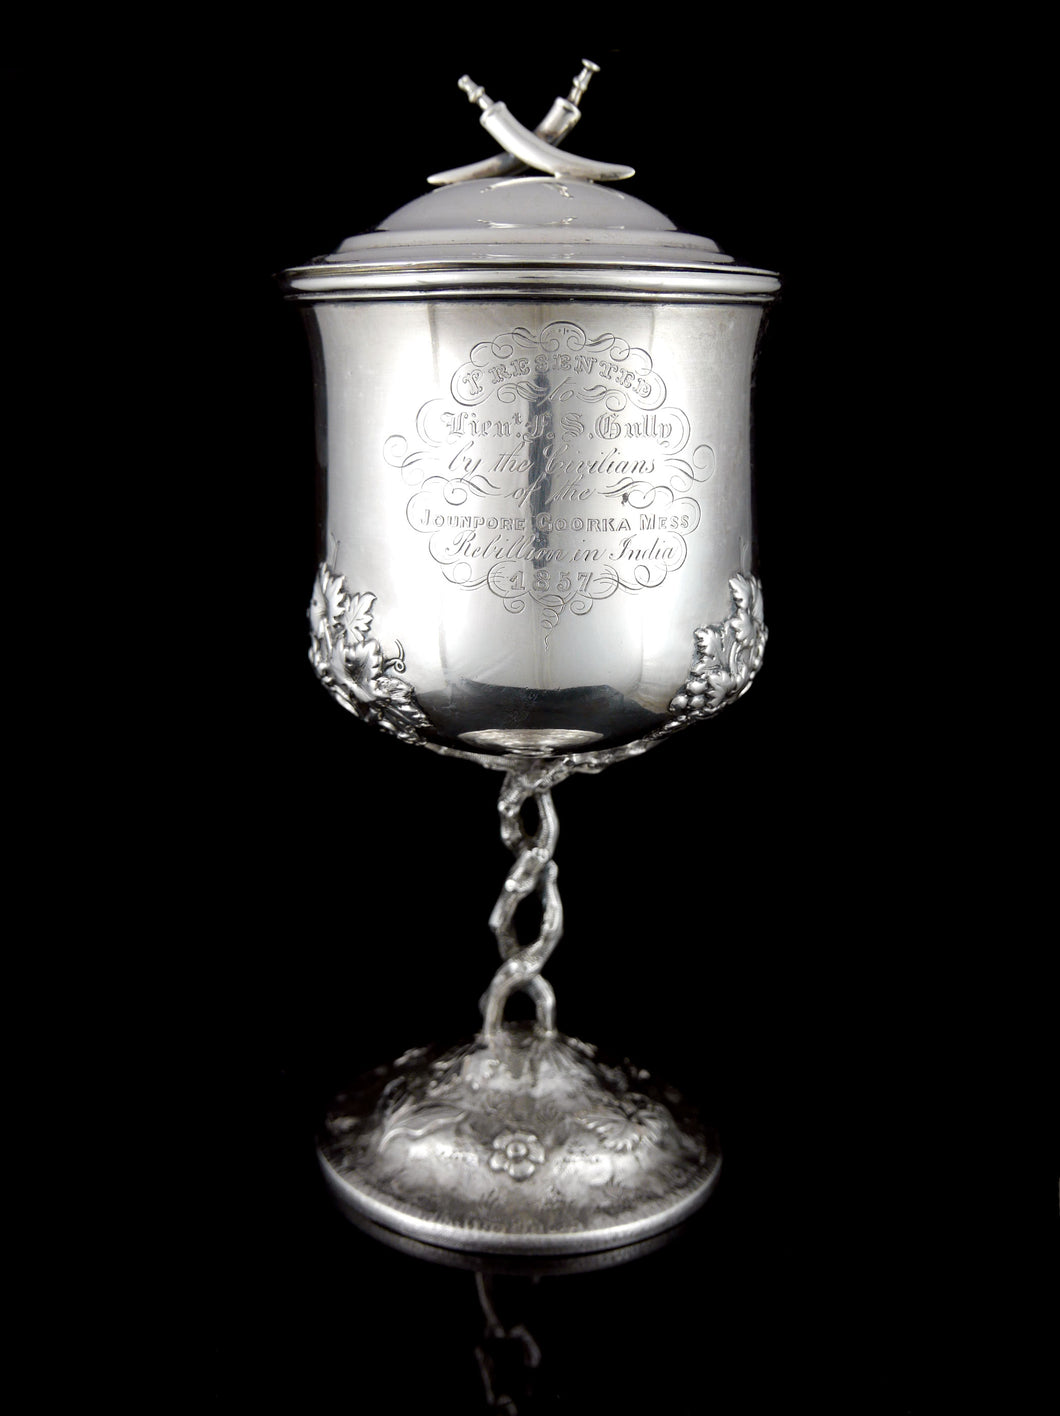 An Indian Mutiny Gurkha Presentation Cup and Cover, 1857